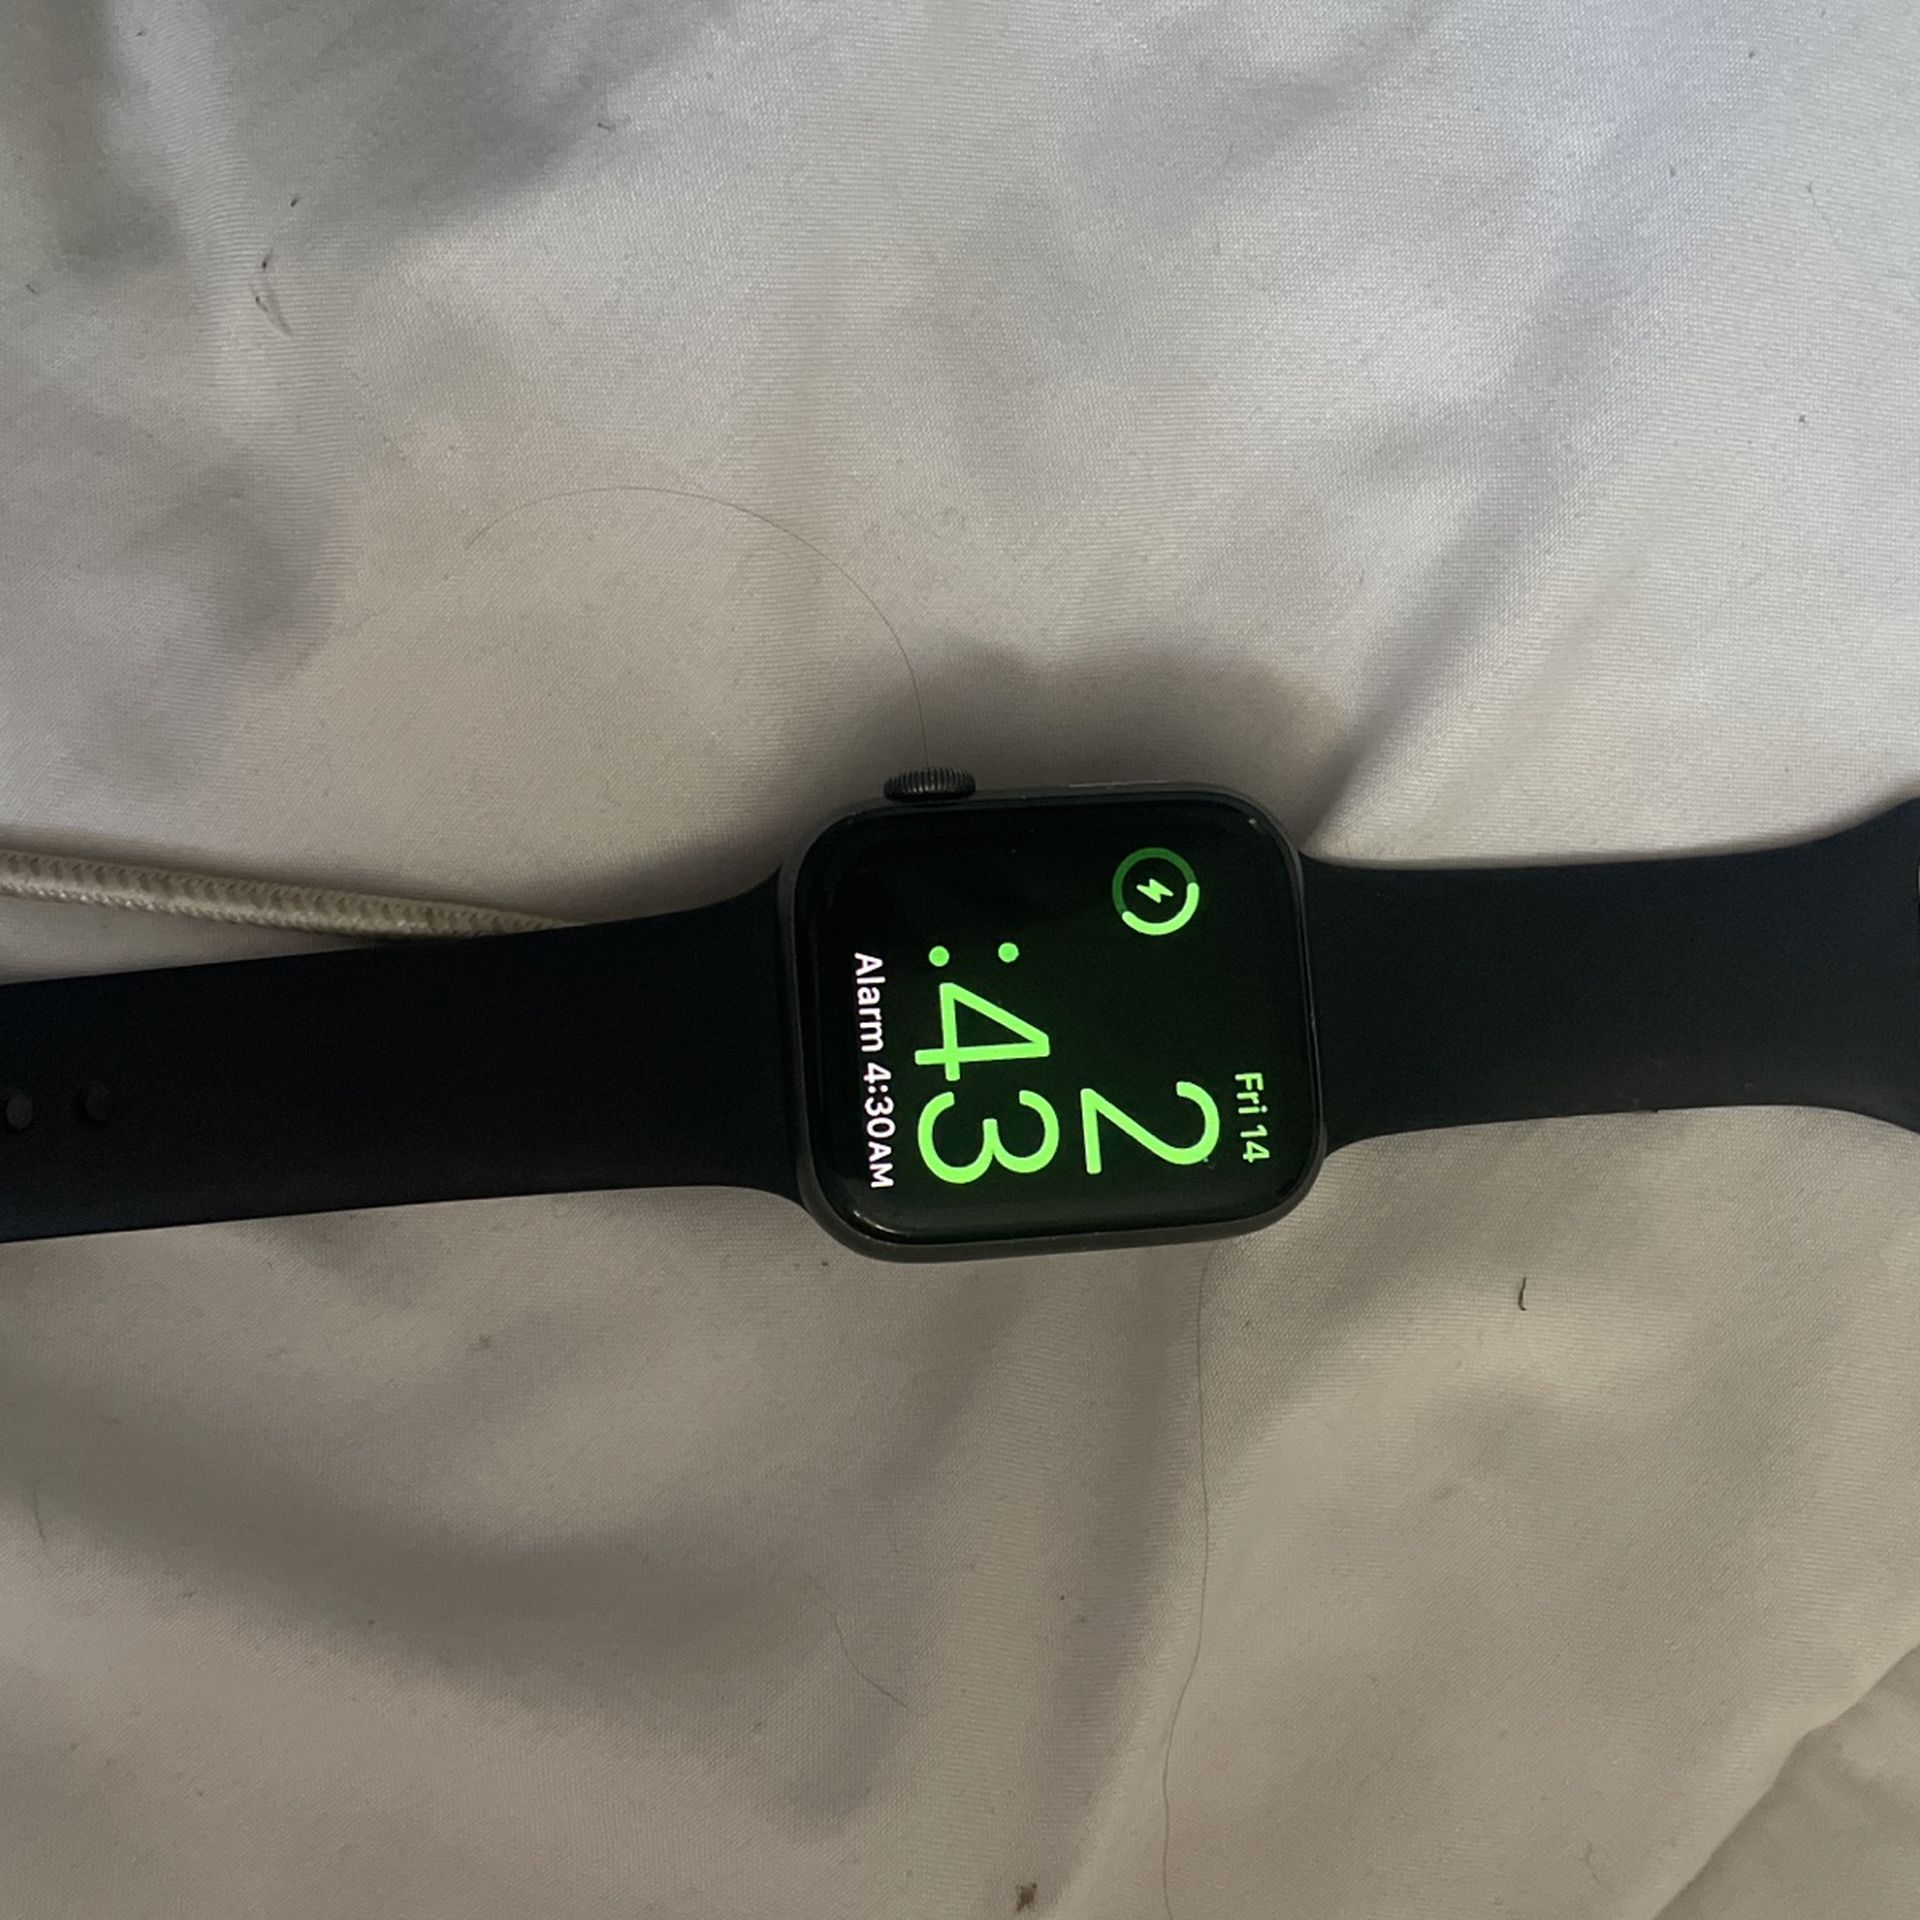 Apple Watch Series 4 (power Button needs replacement)